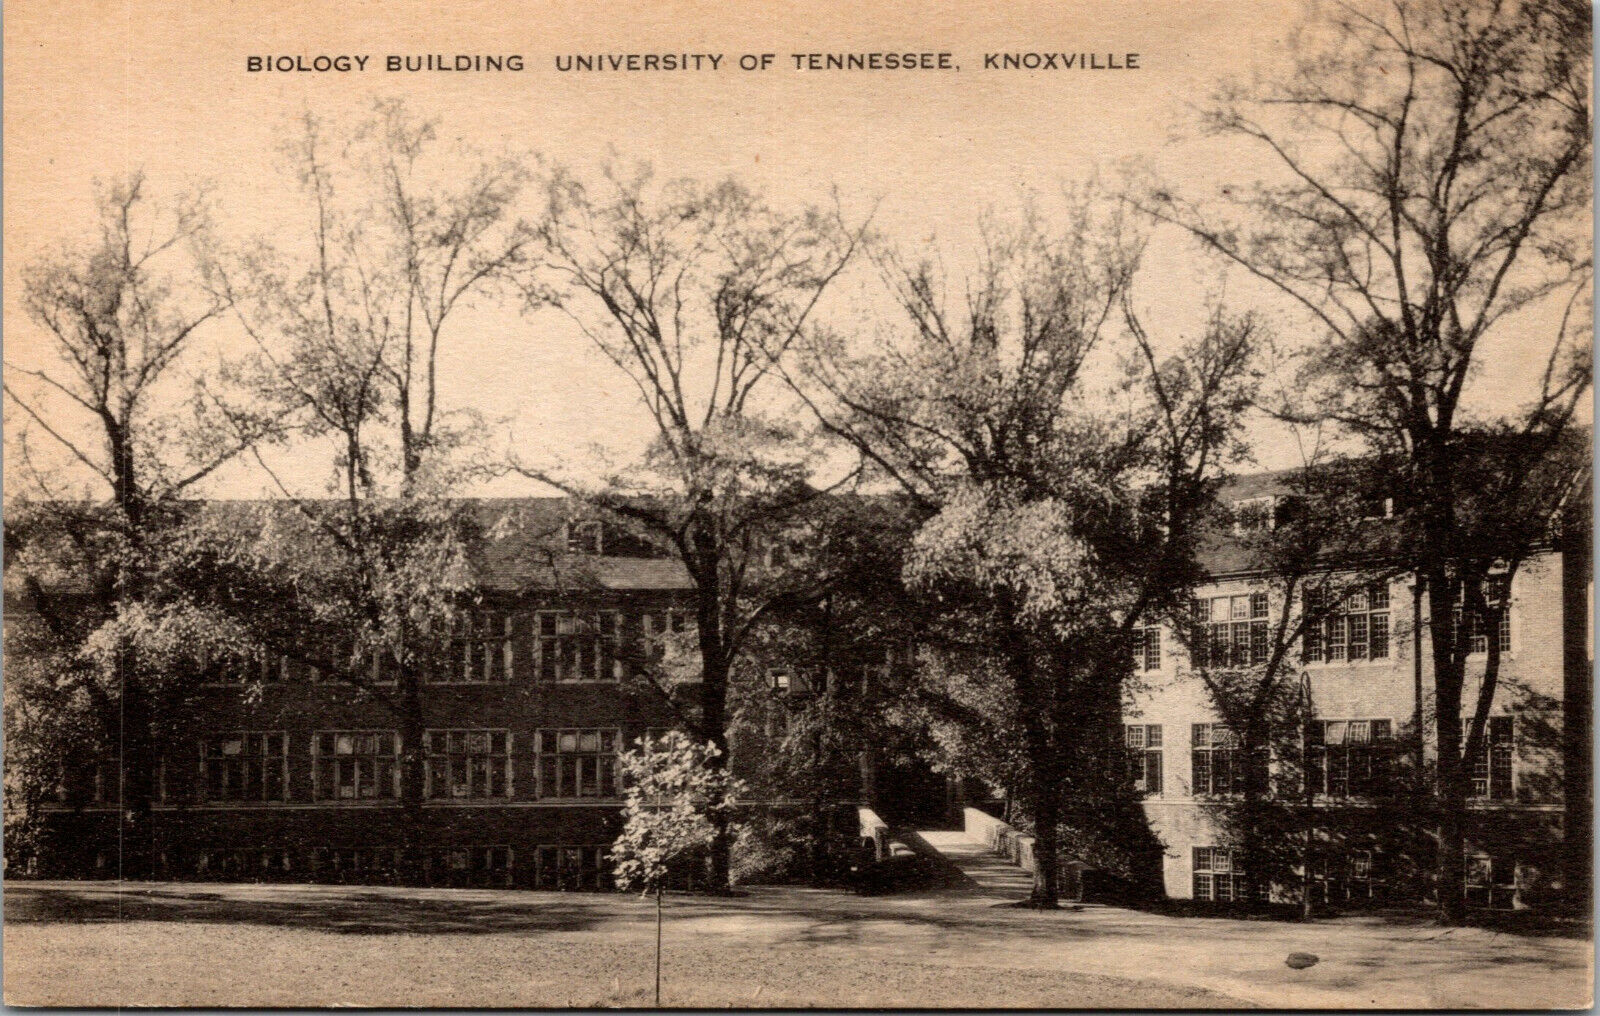 Vtg 1930\'s Biology Building University Of Tennessee Knoxville TN Postcard